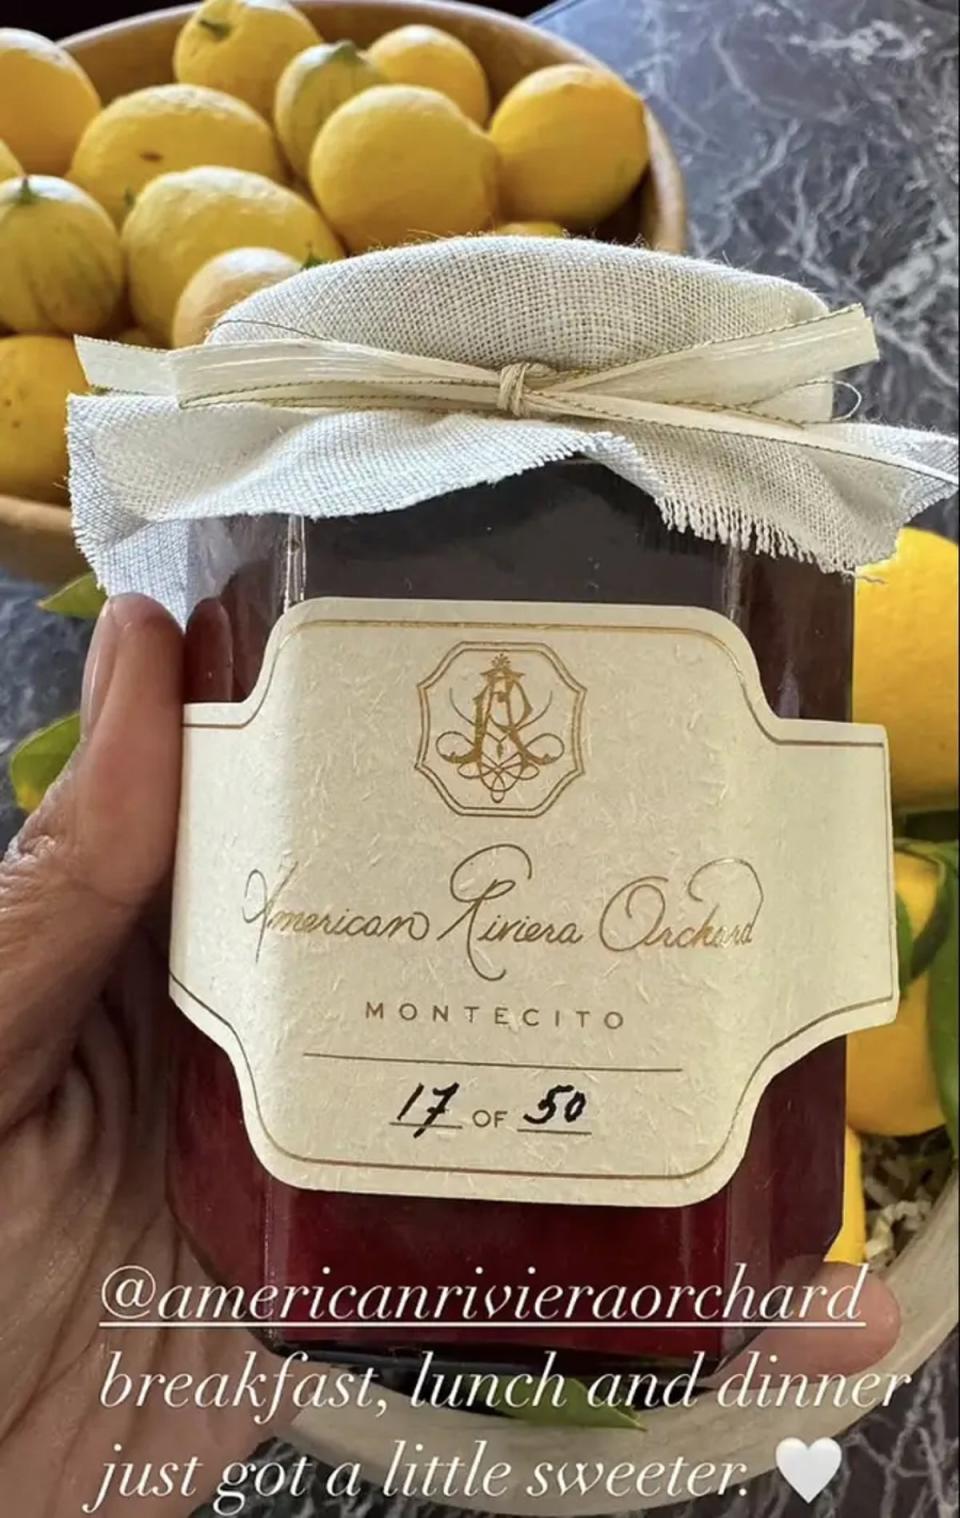 Meghan Markle’s new luxury jam has been promoted on social media this week (Tracy Robbins/Instagram)